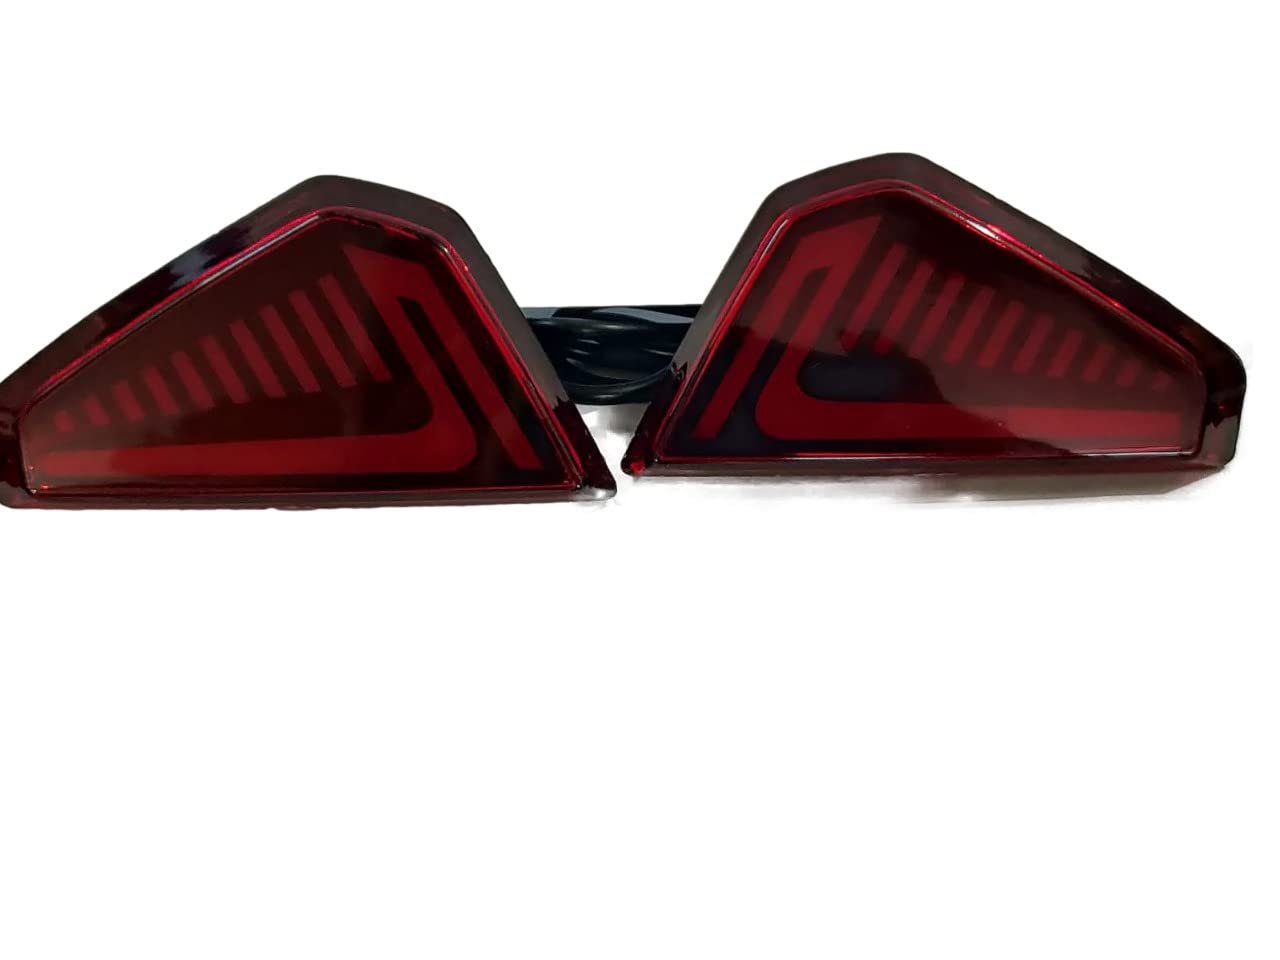 Car reflector LED Brake Light with scan and turn Indicator for Rear Bumper Fit for Nexon 2021 (Set of 2, Matrix)